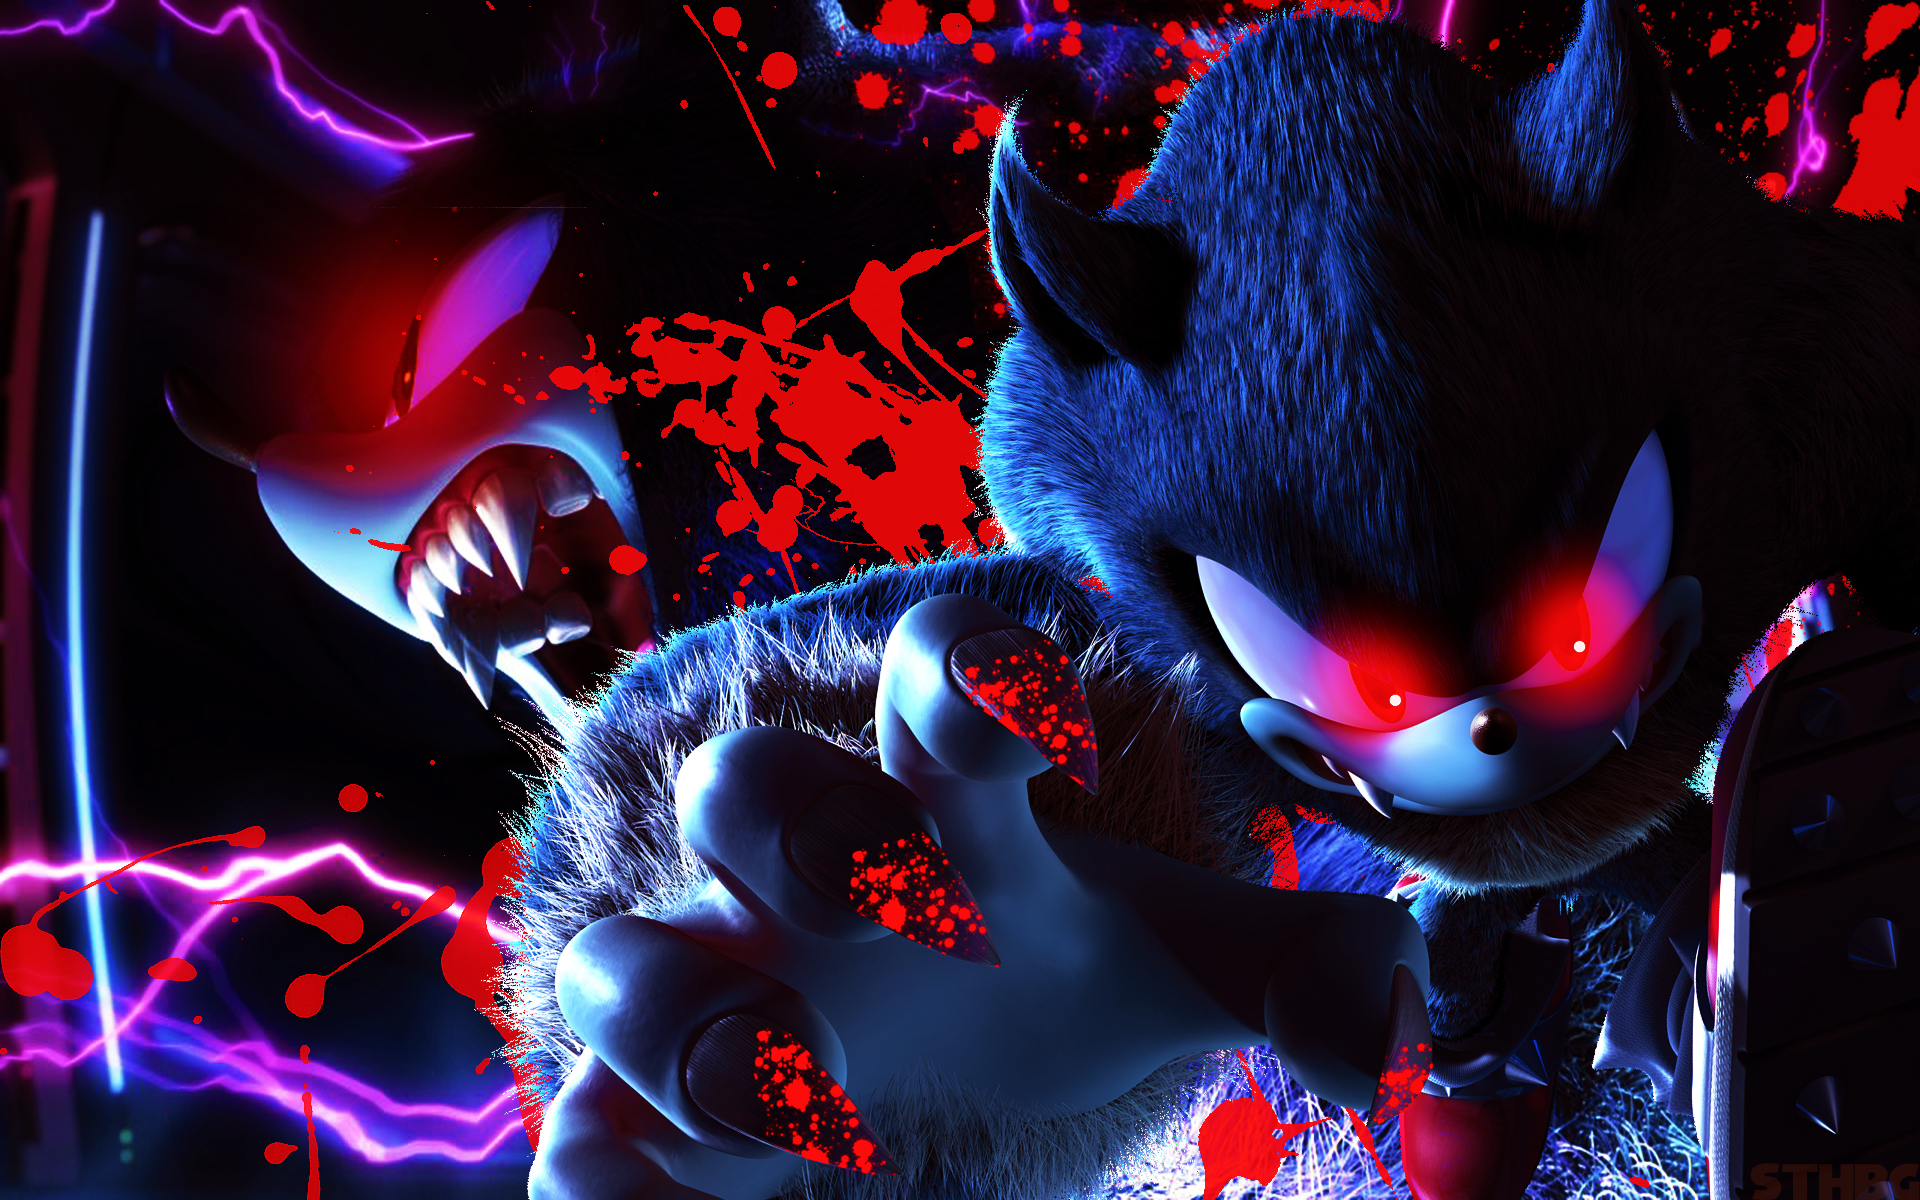 video game, sonic unleashed, sonic the werehog, sonic